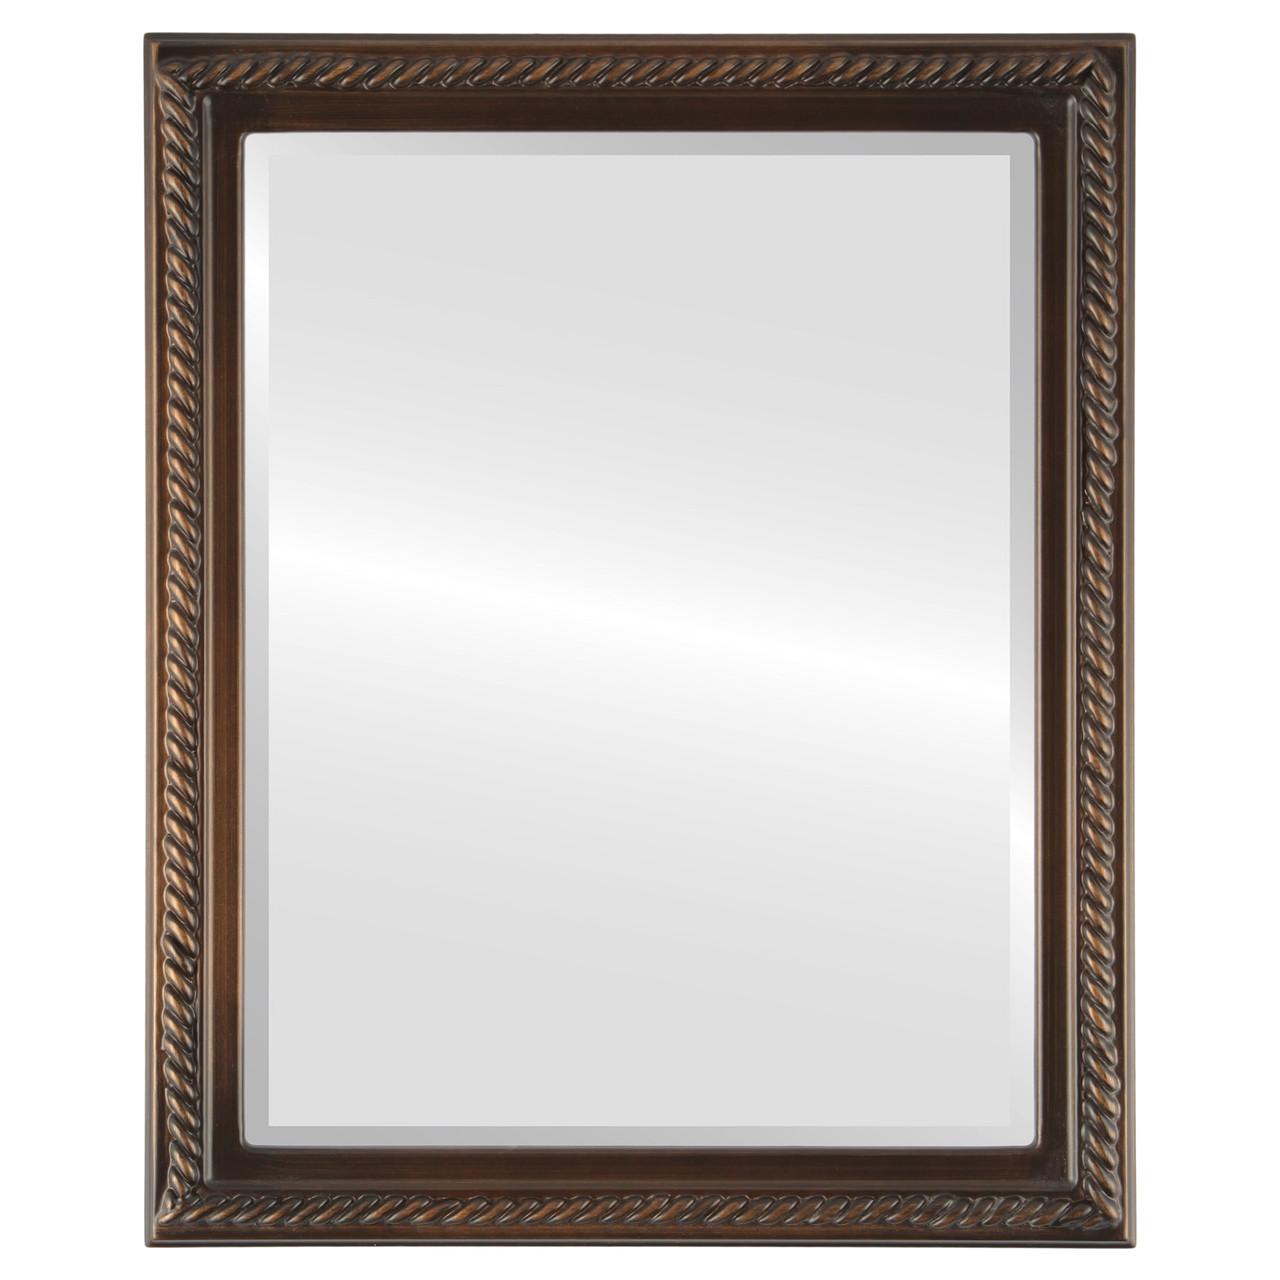 Rubbed Bronze Rectangle Mirrors from $136 Free Shipping